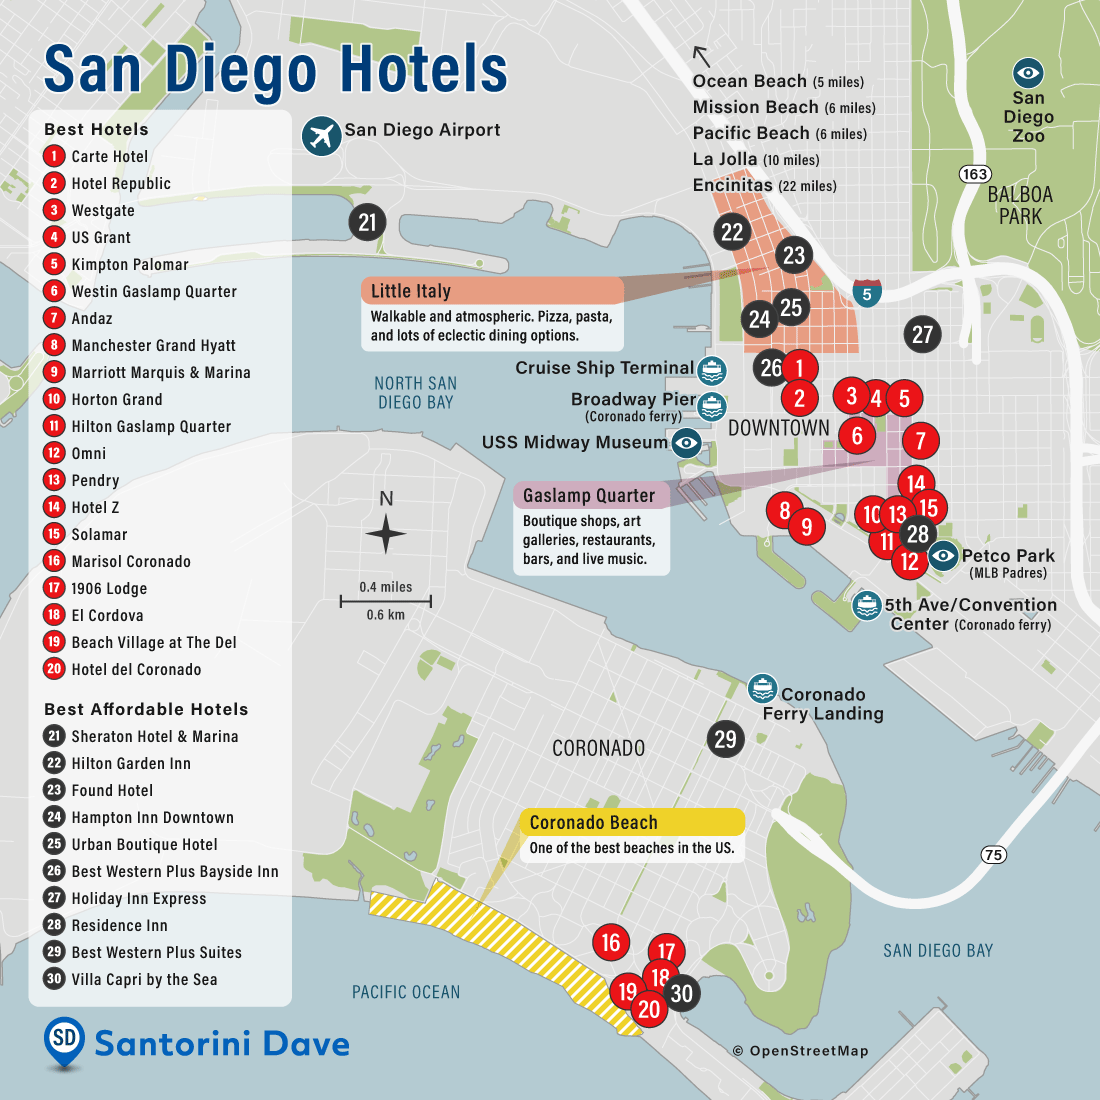 Map of San Diego Hotels and Neighborhoods